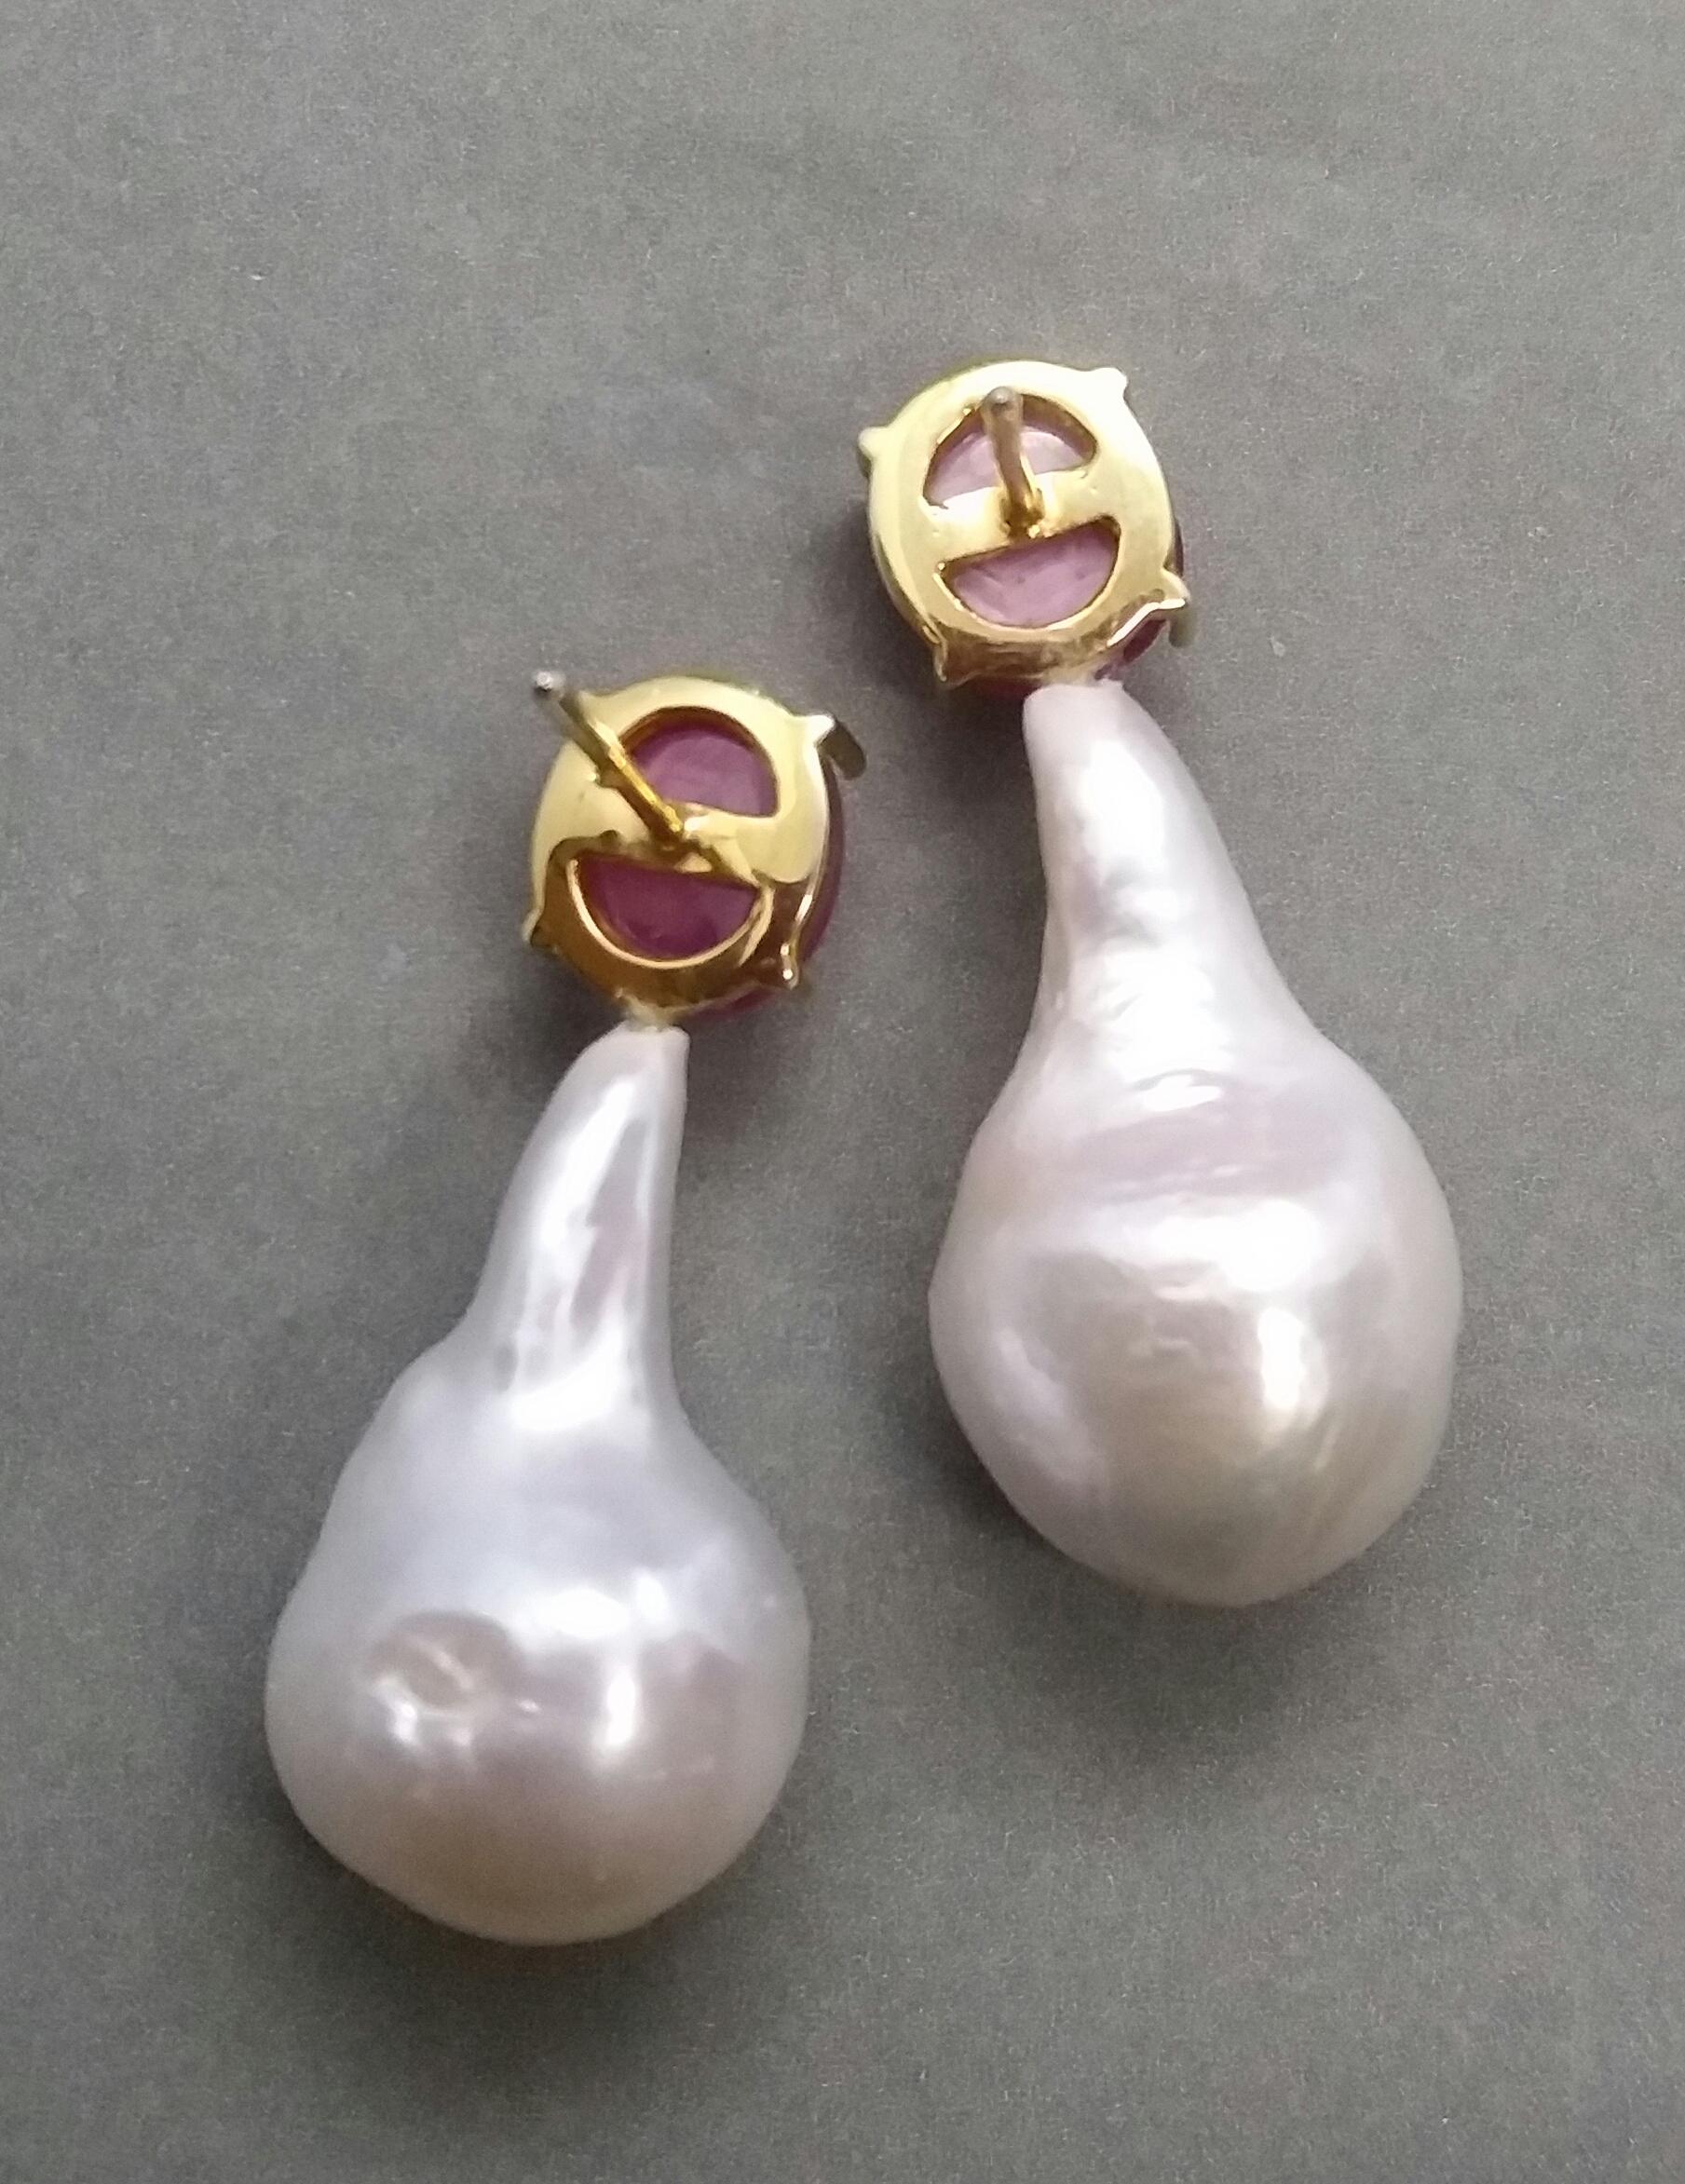 Big Size Pear Shape Baroque Pearls Oval Ruby Cabochon 14 Karat Gold Earrings For Sale 1